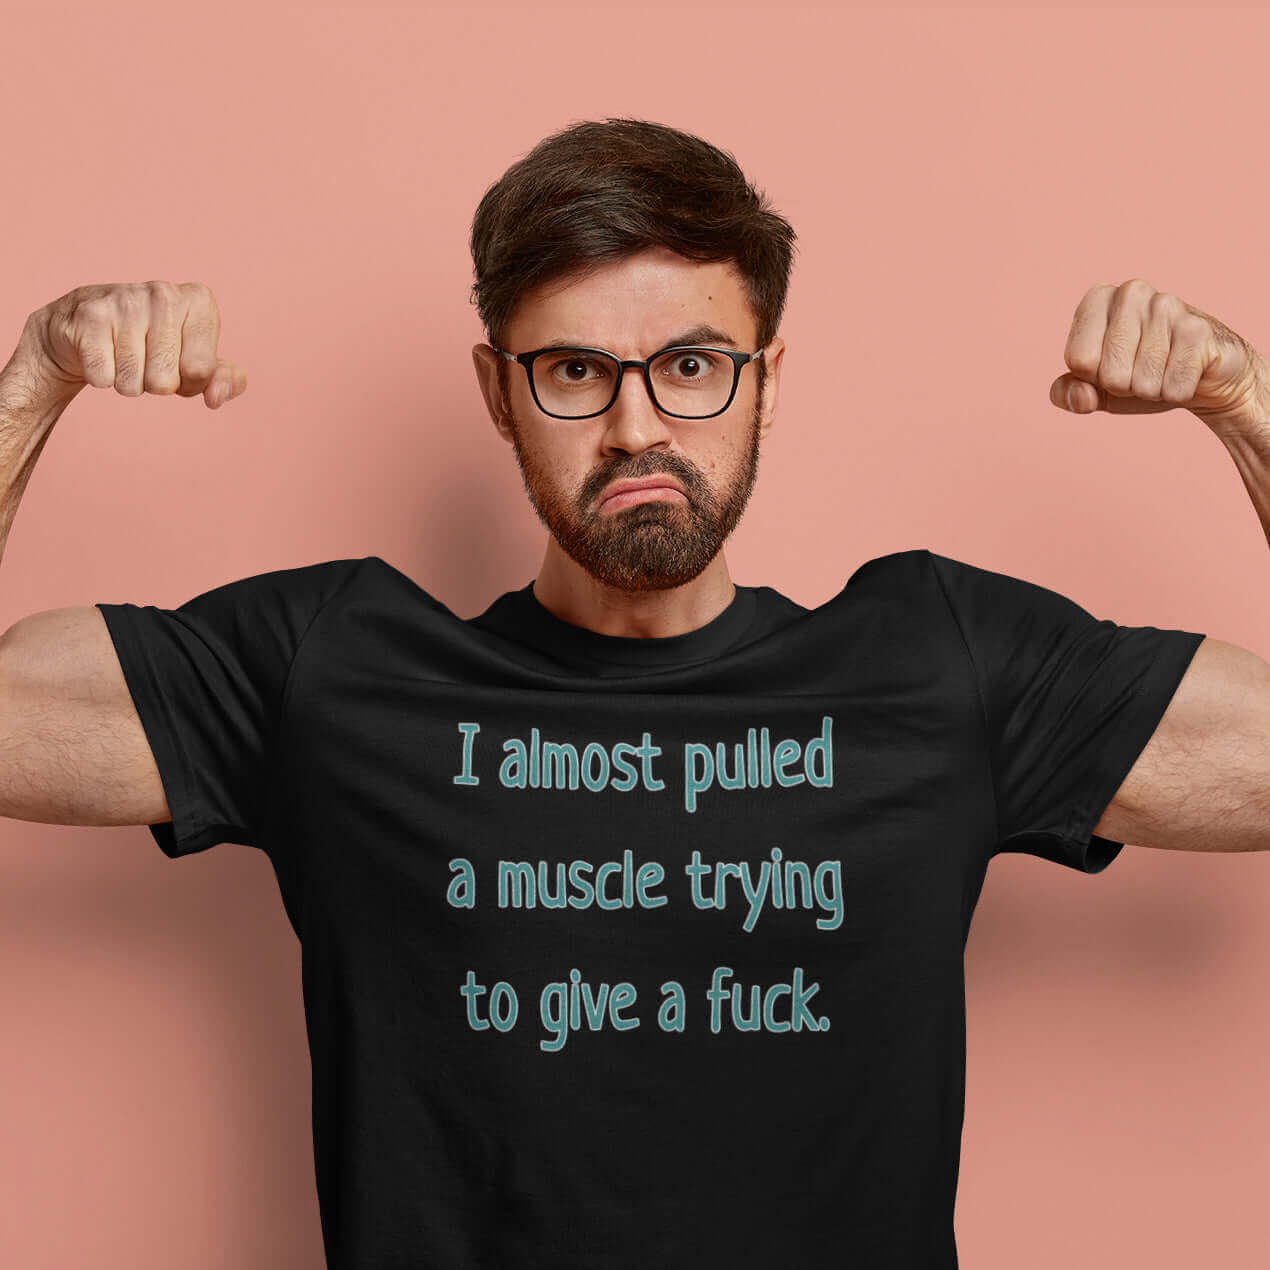 man flexing muscles wearing tshirt that says I Almost pulled a muscle trying to give a fuck by witticismsrus.com